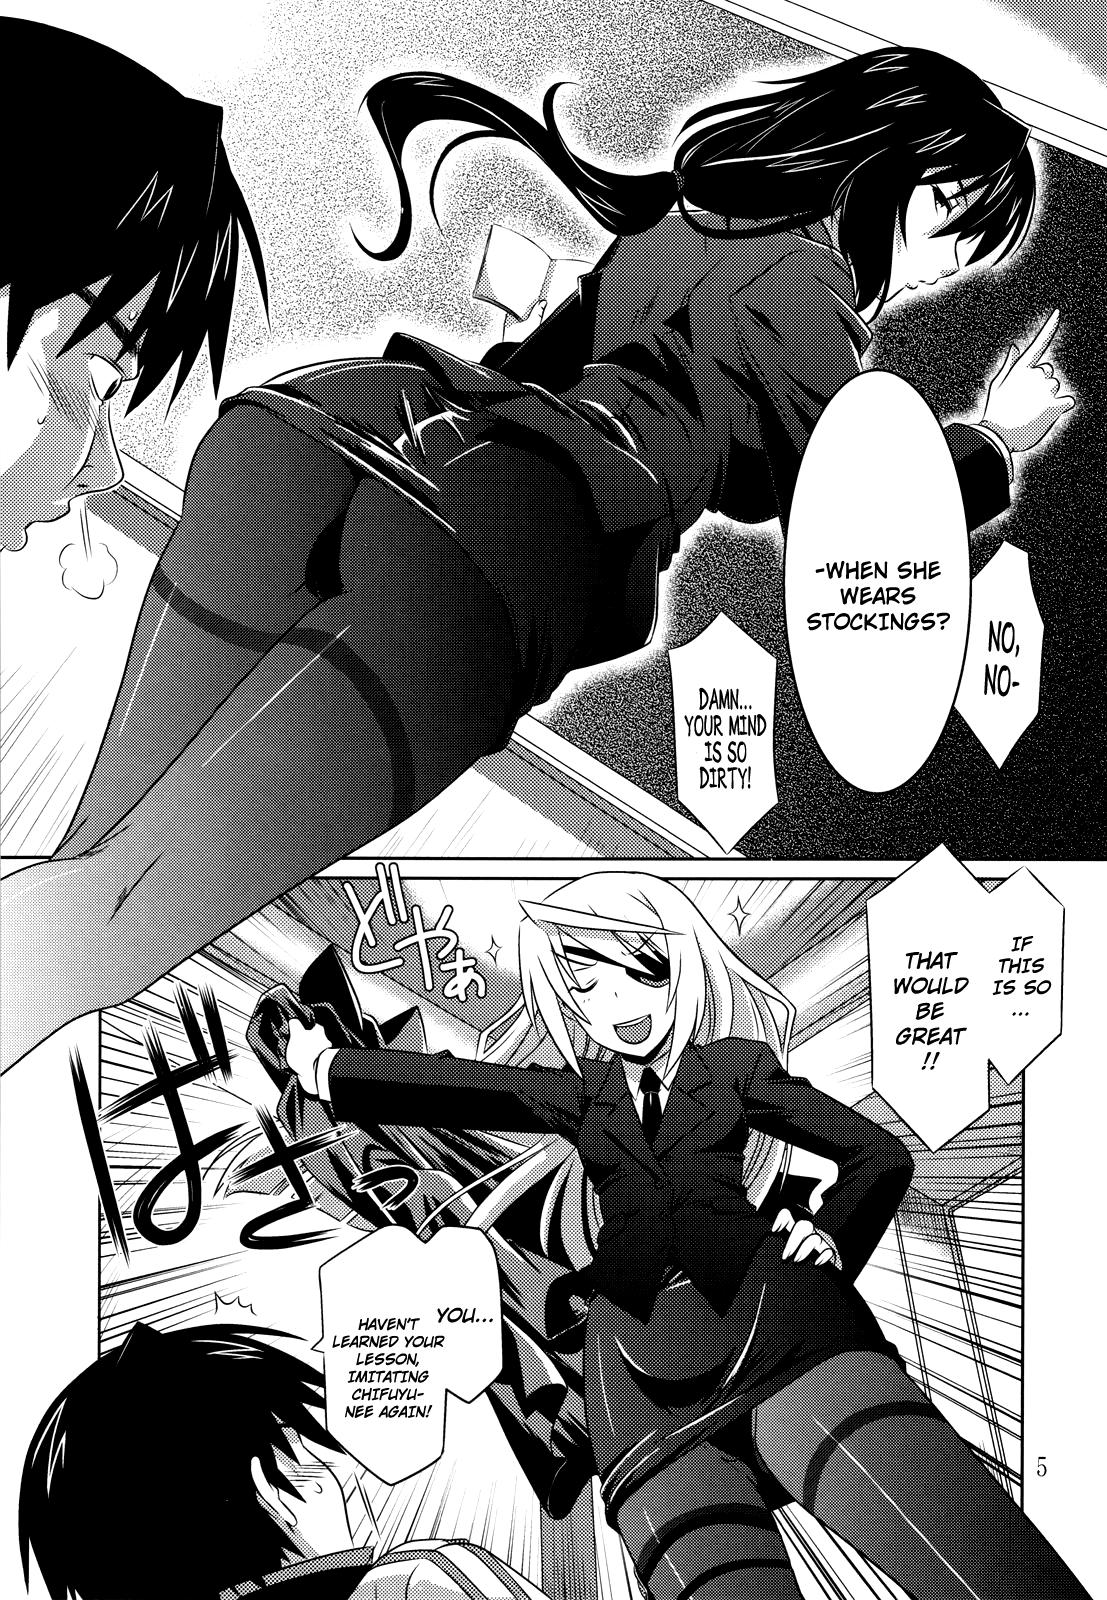 Girls Getting Fucked is Incest Strategy 2 - Infinite stratos Jizz - Page 4